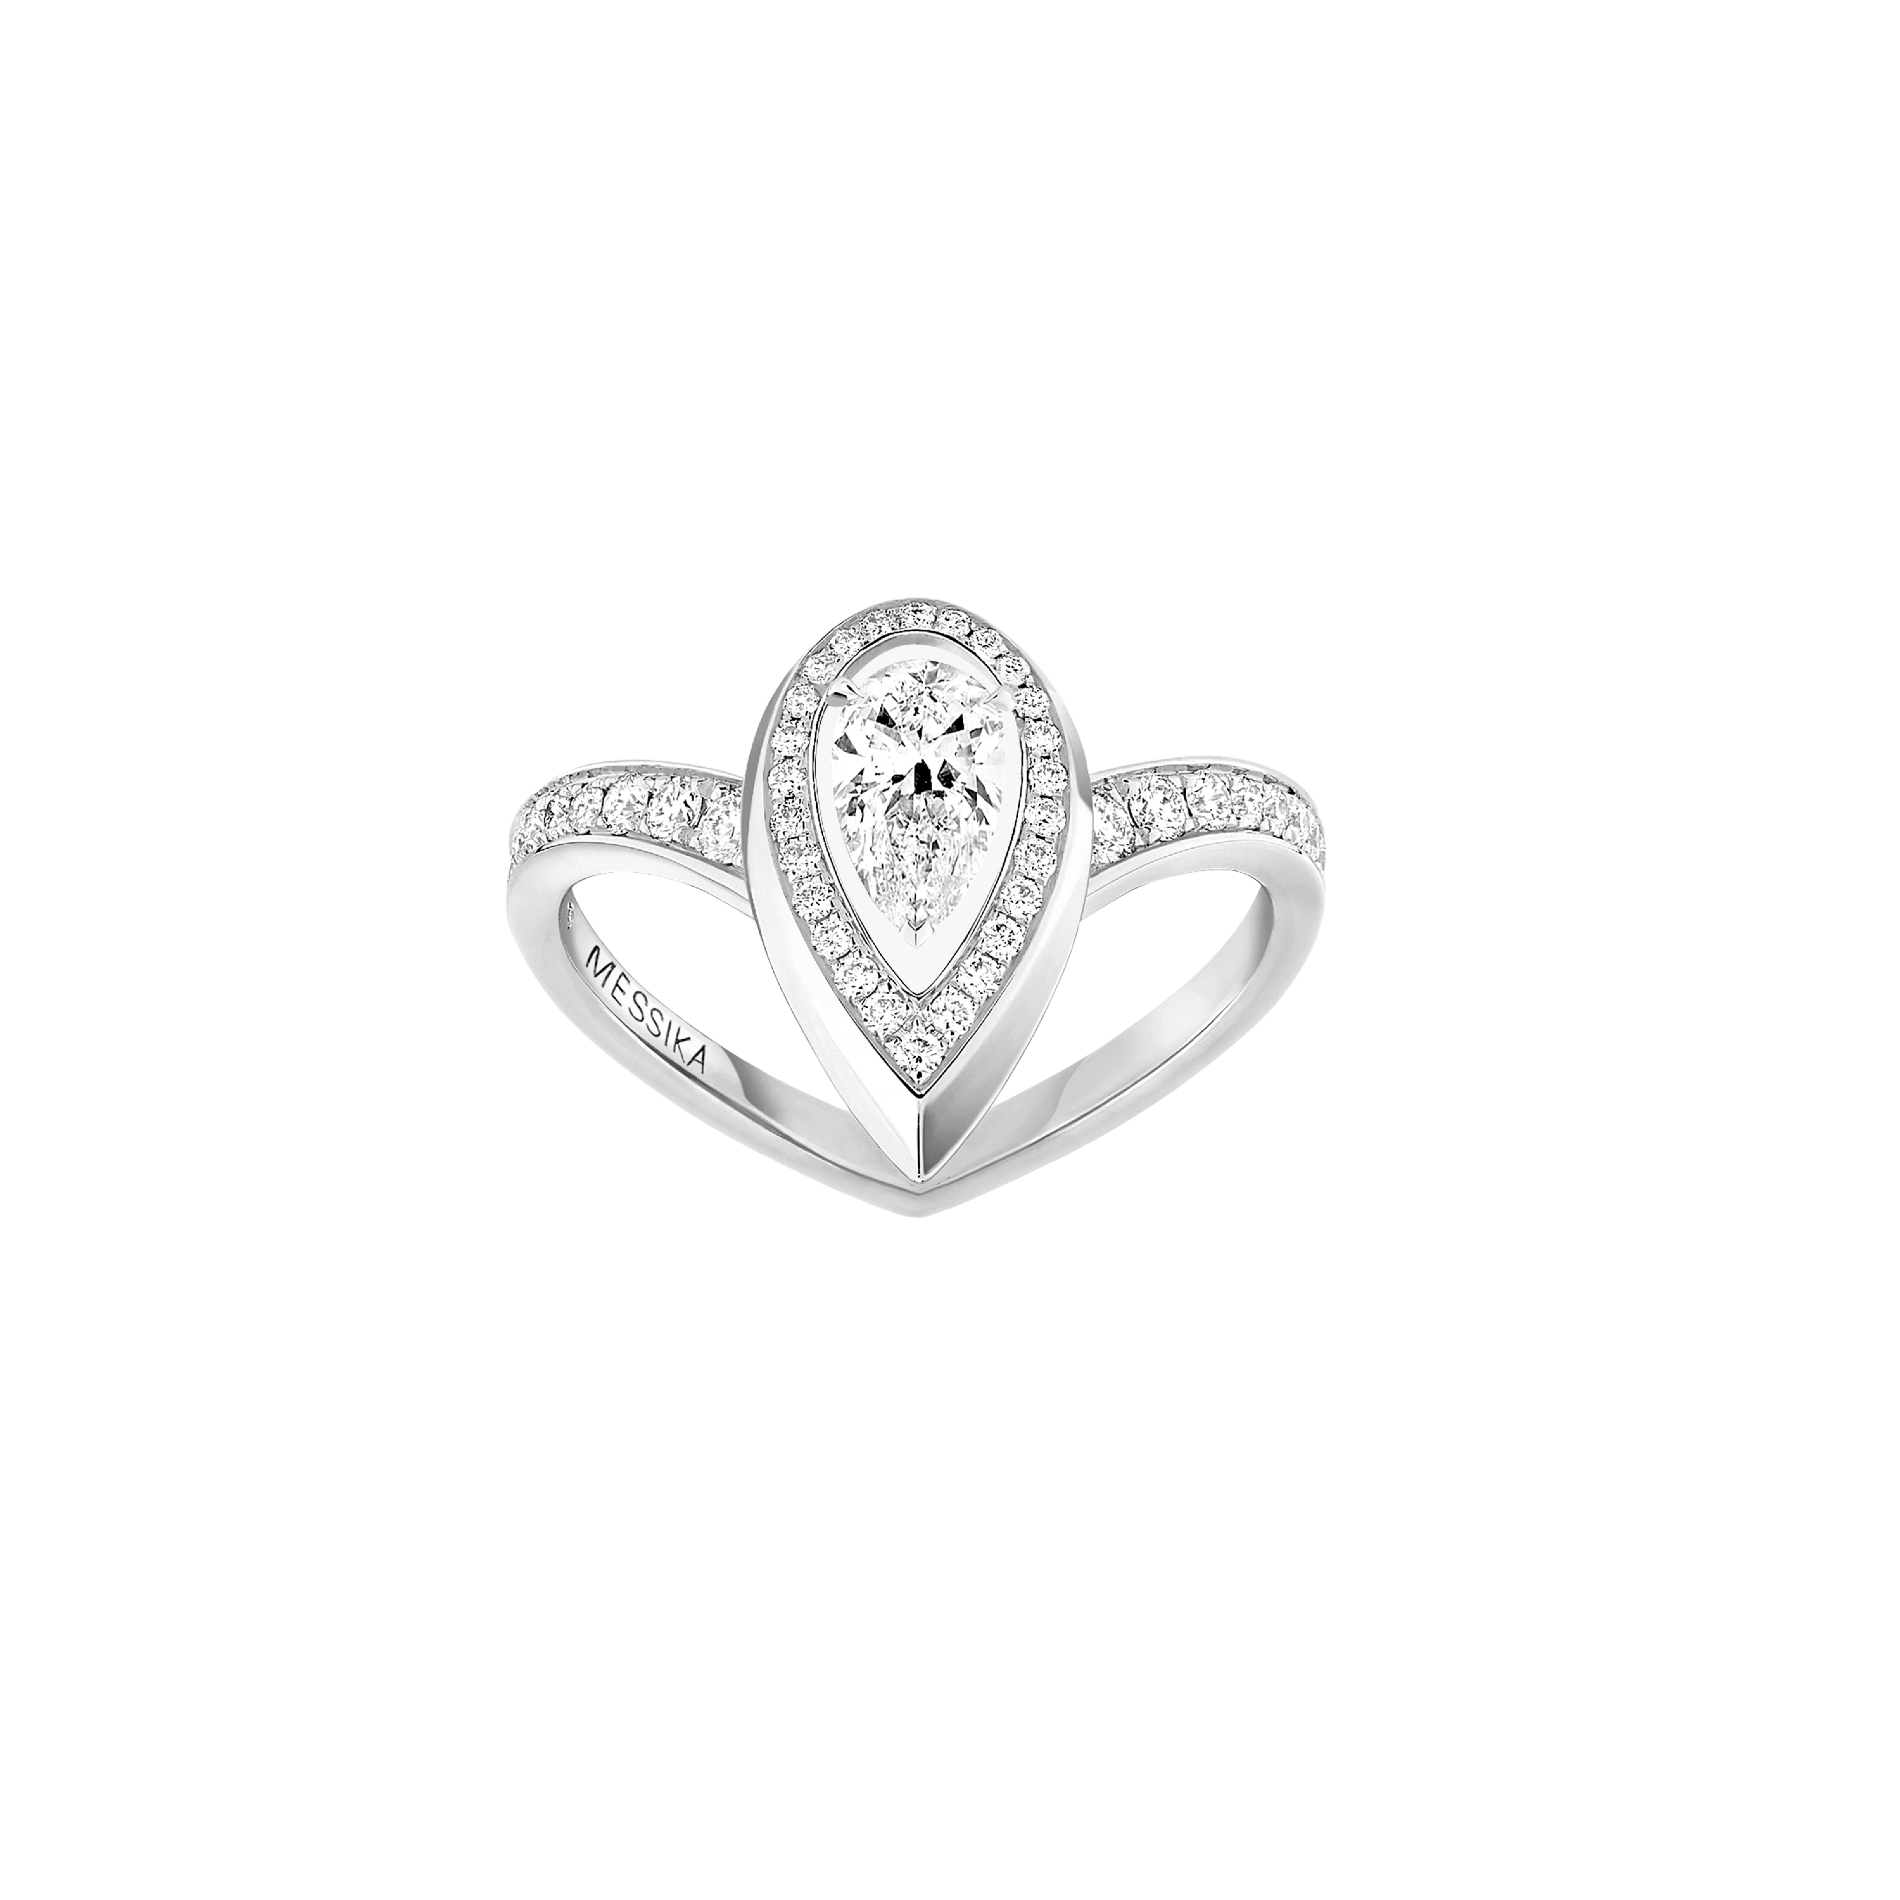 Bague Fiery 0,30ct Diamant Or Blanc